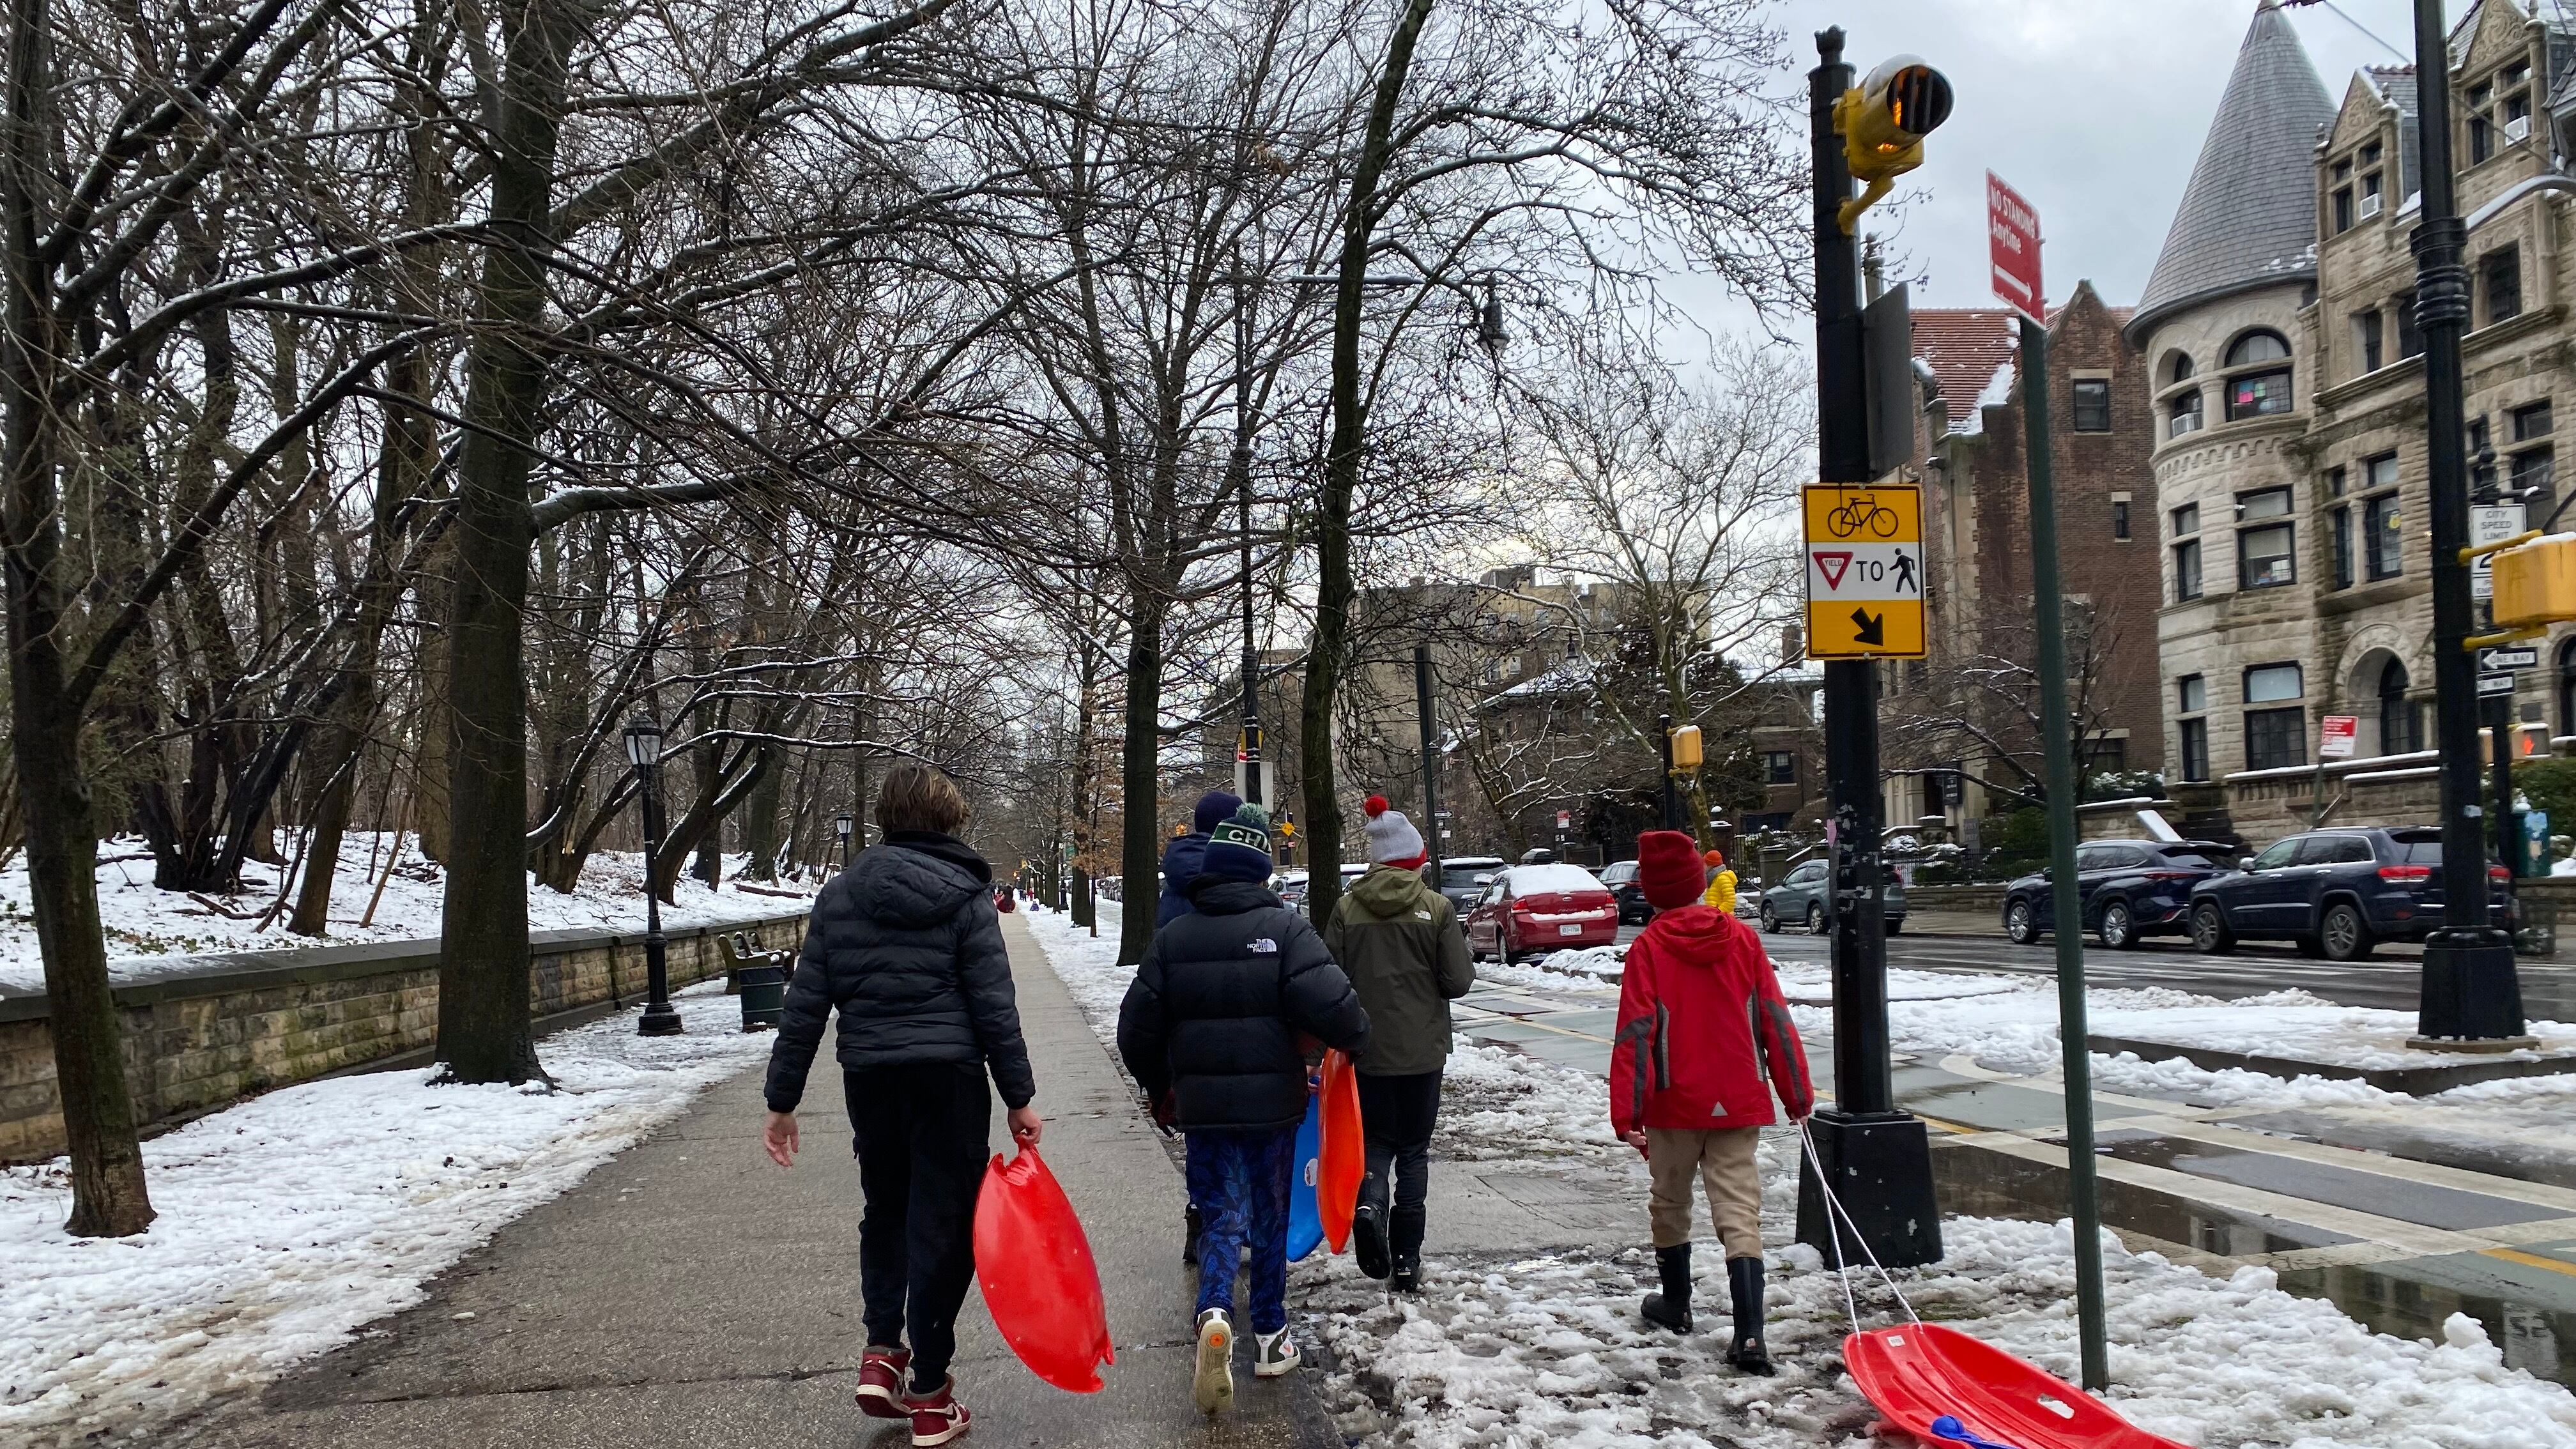 A group of children in winter gear with sleds walking on a sidewalk without much snow.